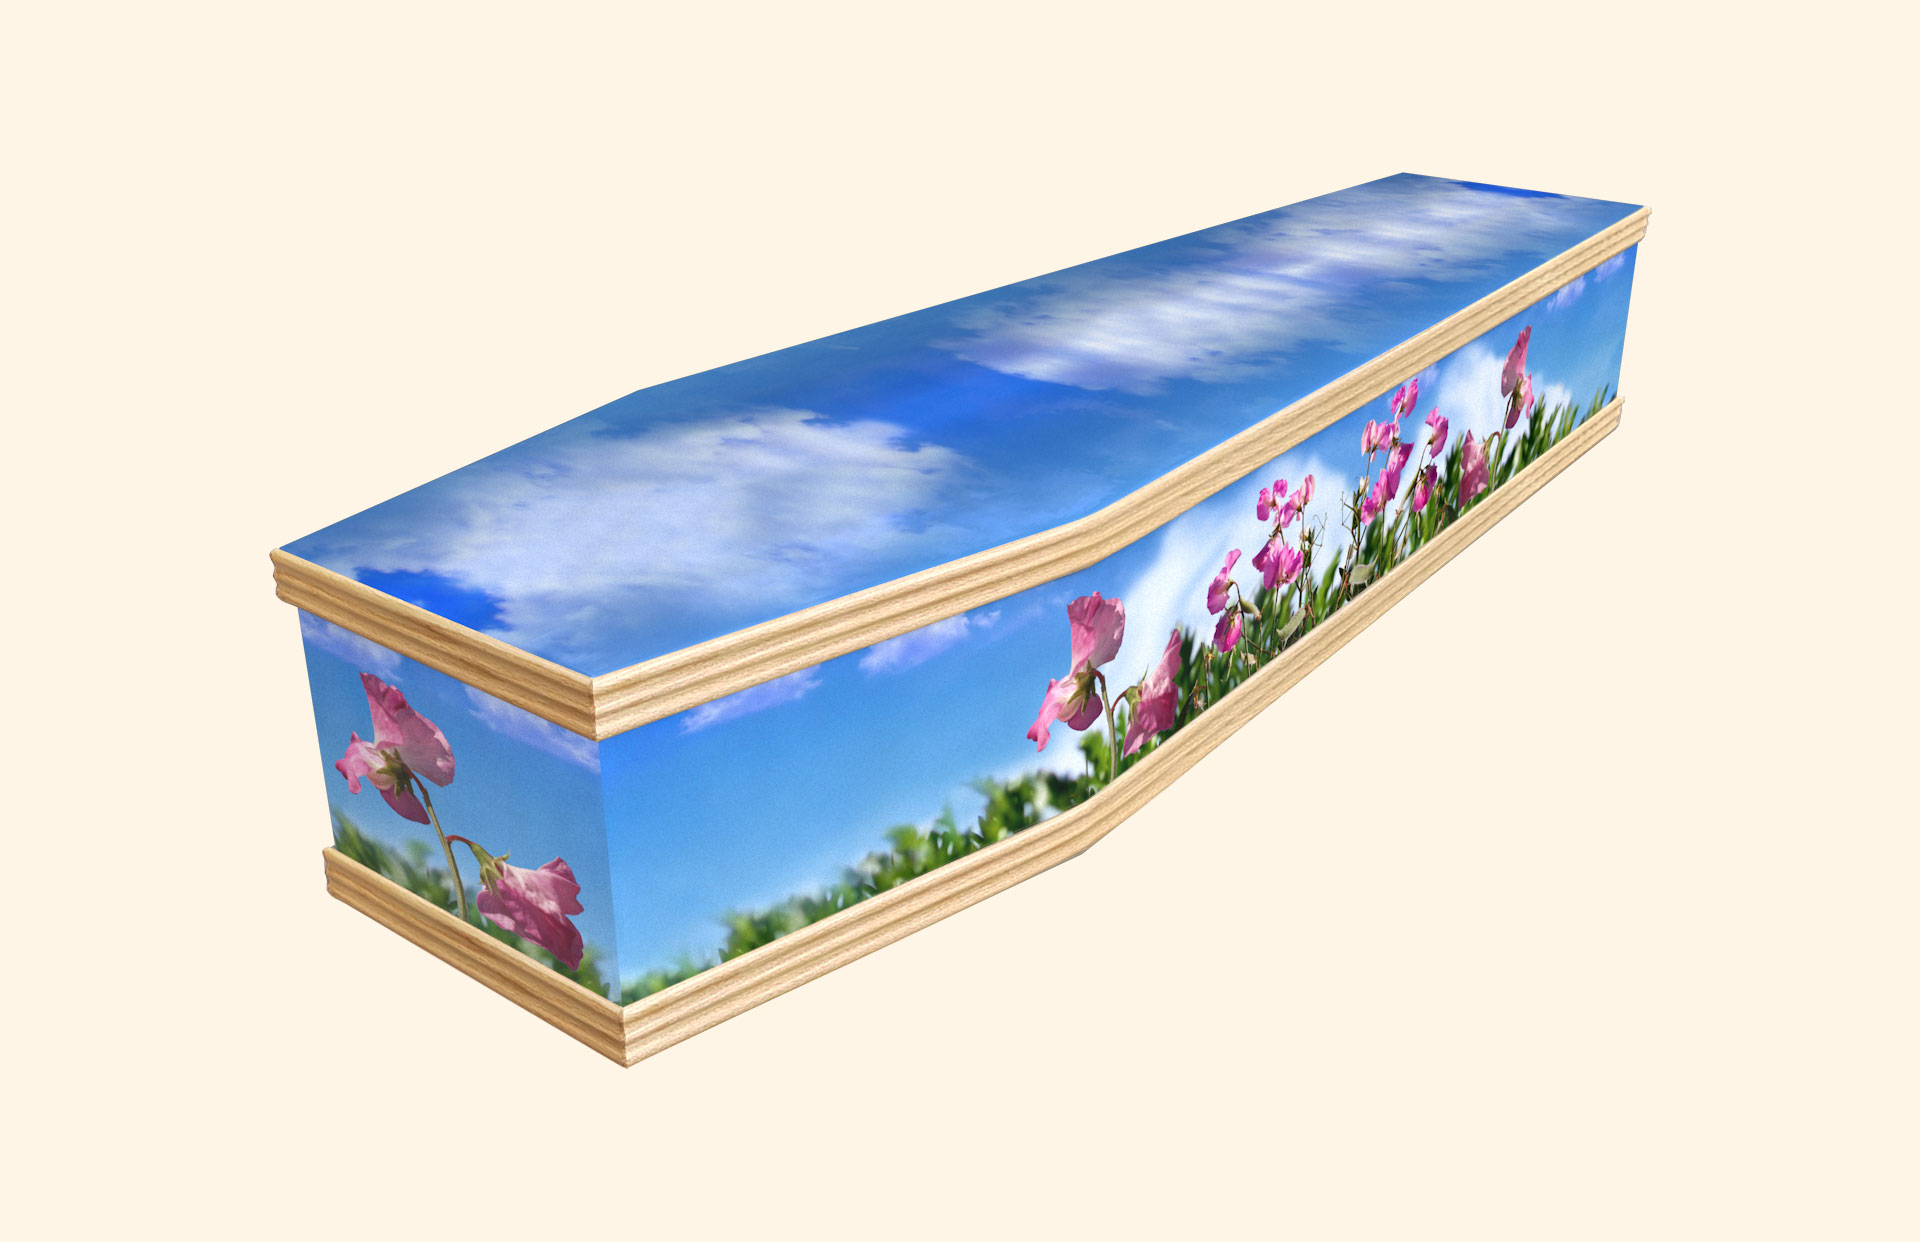 Sweet Peas design on a classic coffin